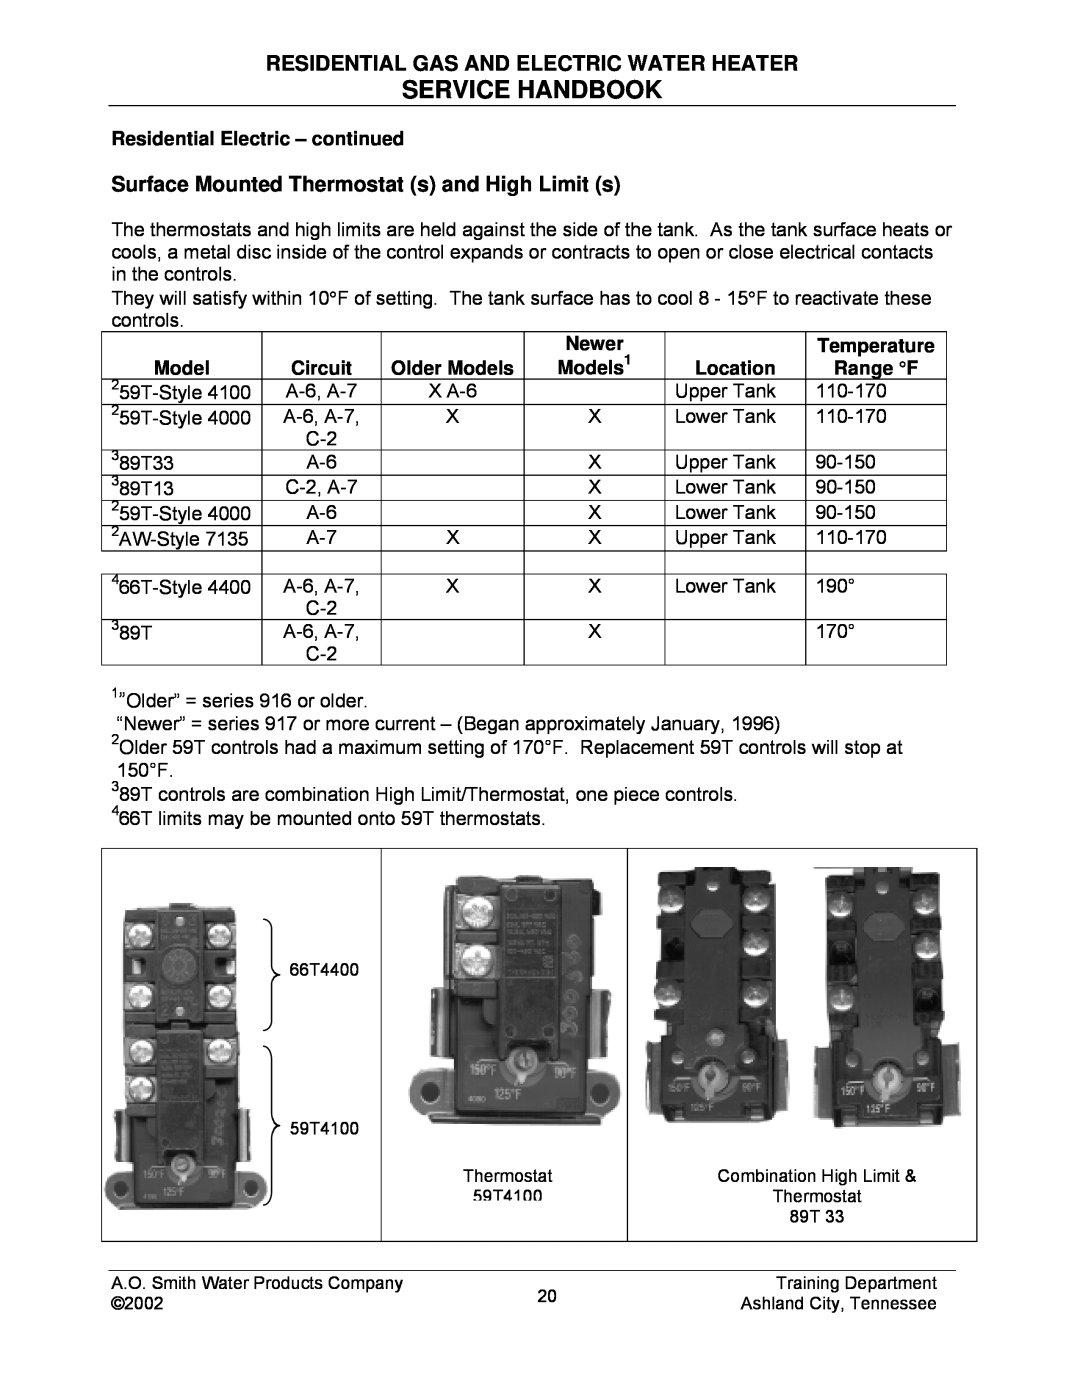 A.O. Smith TC-049-R2 manual Service Handbook, Residential Gas And Electric Water Heater, Circuit, Older Models, Models1 